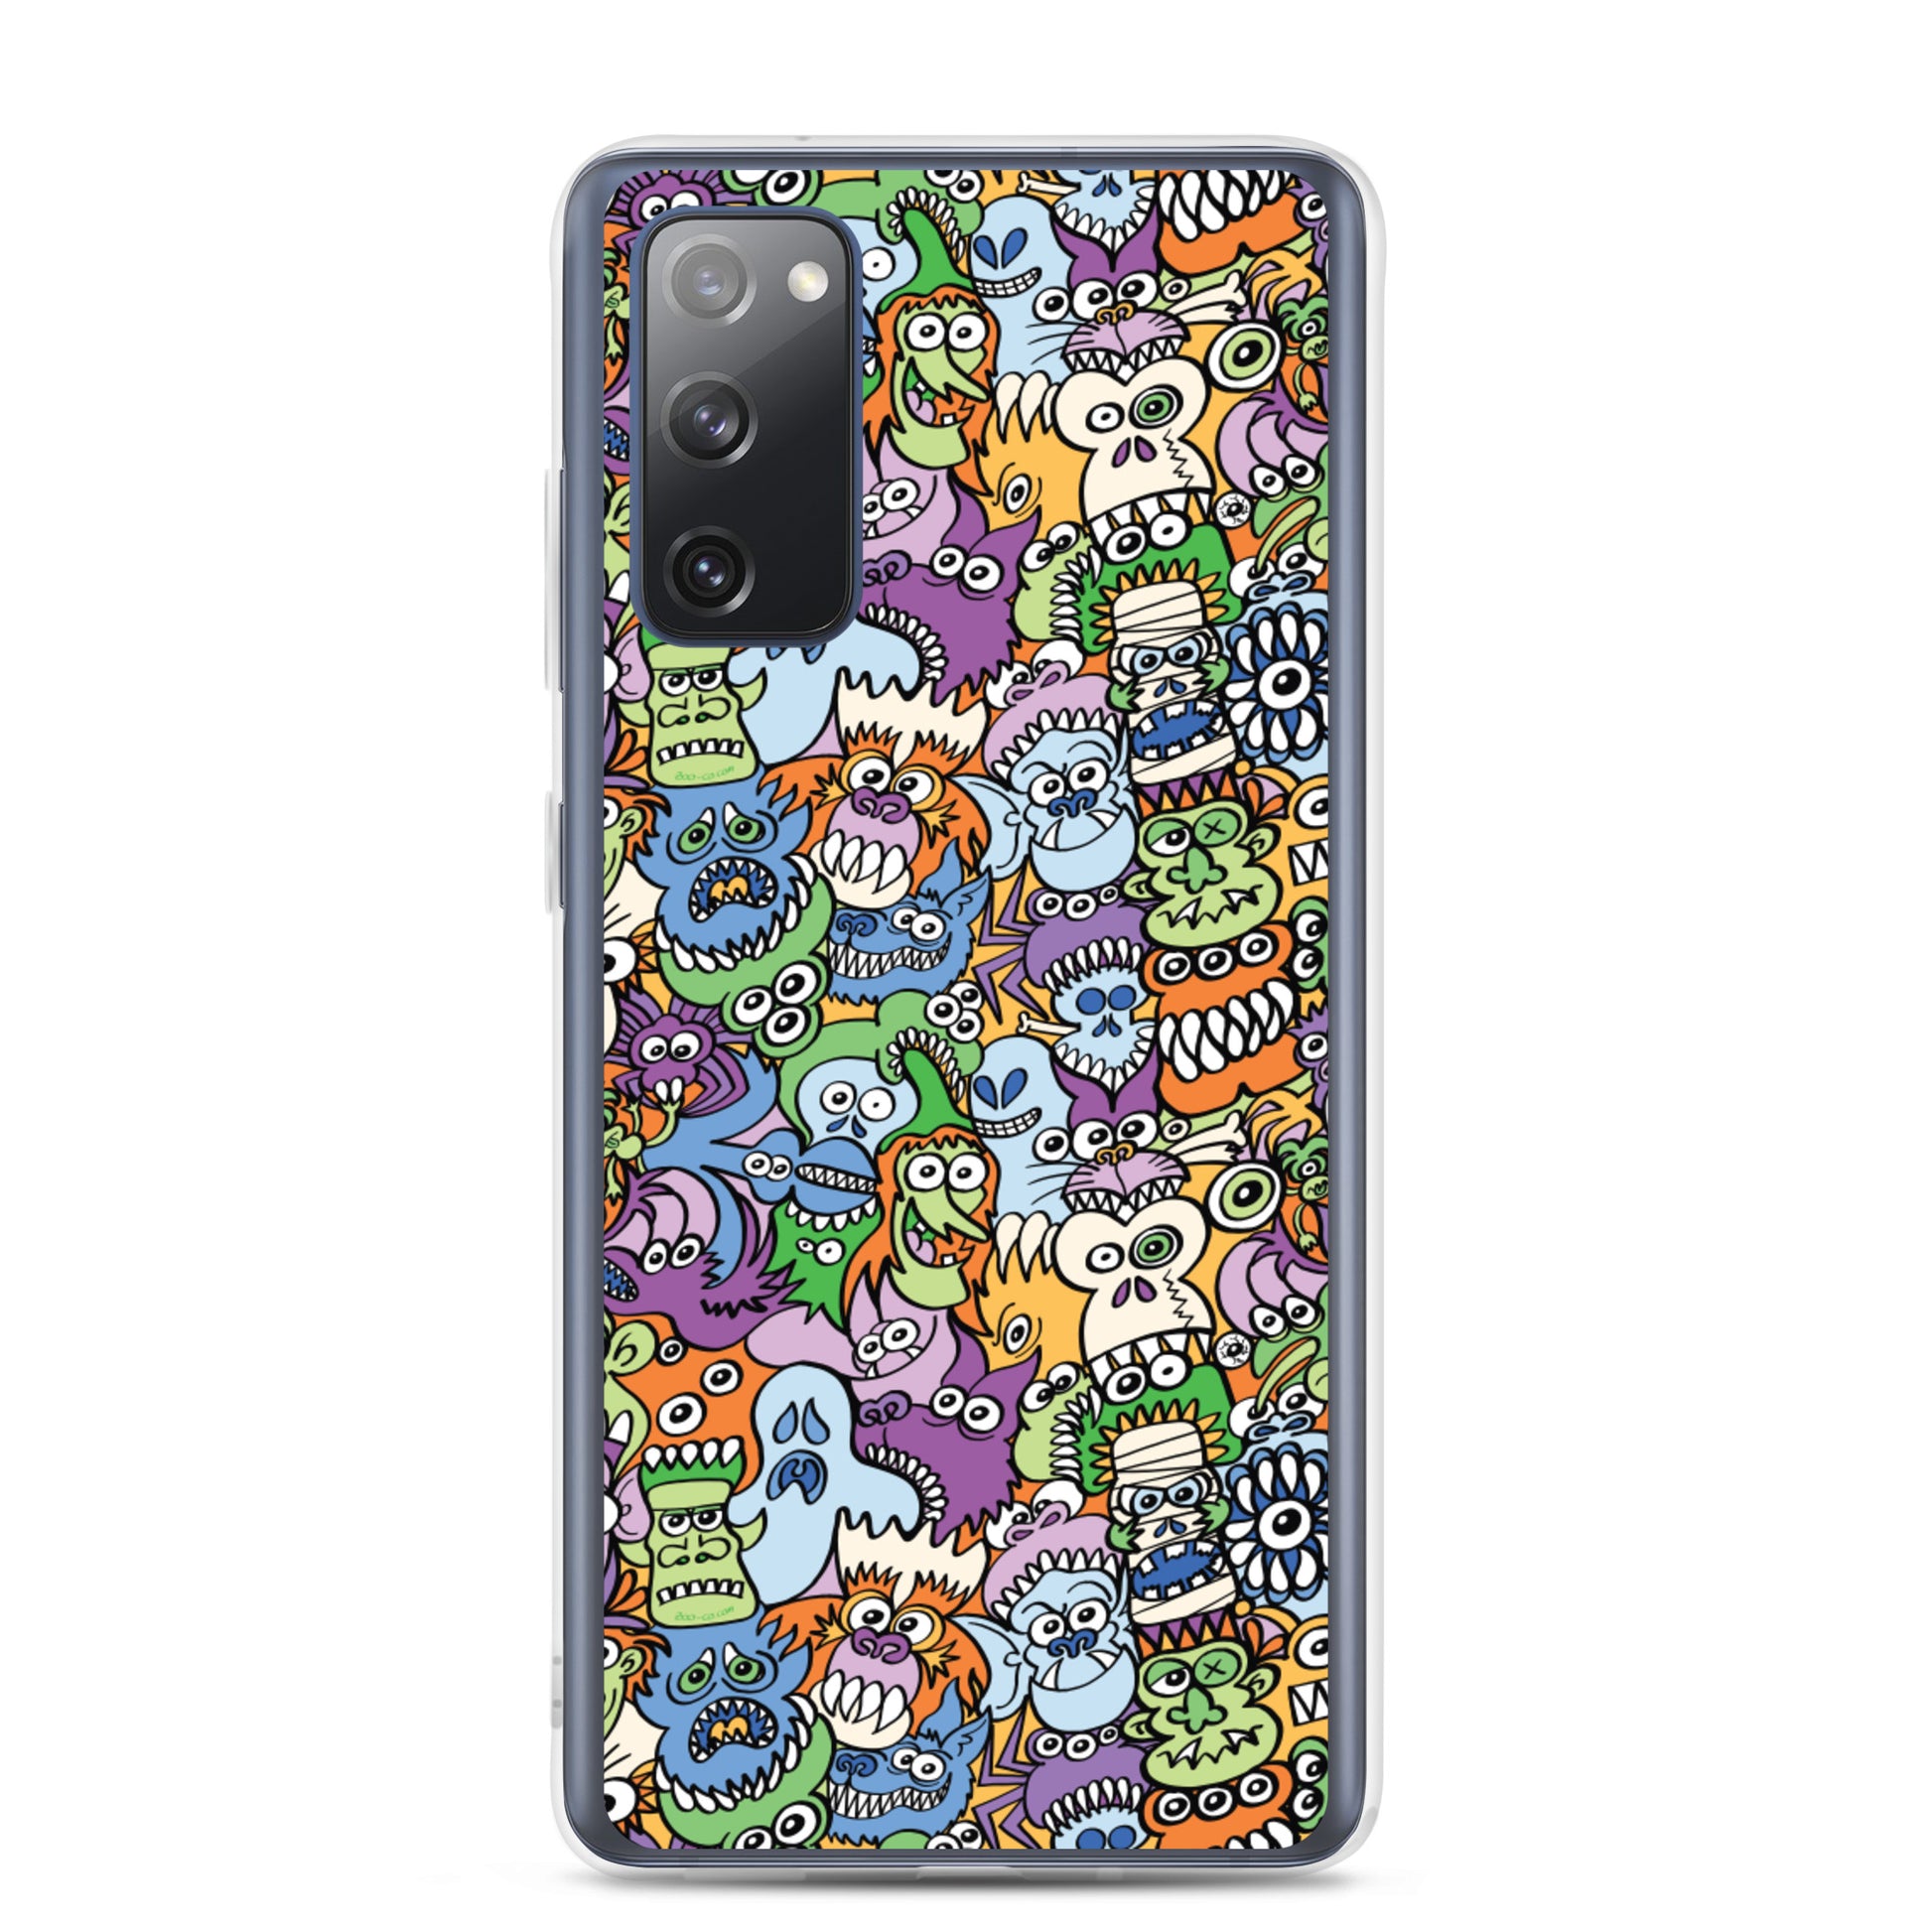 All the spooky Halloween monsters in a pattern design Samsung Case. s20 fe